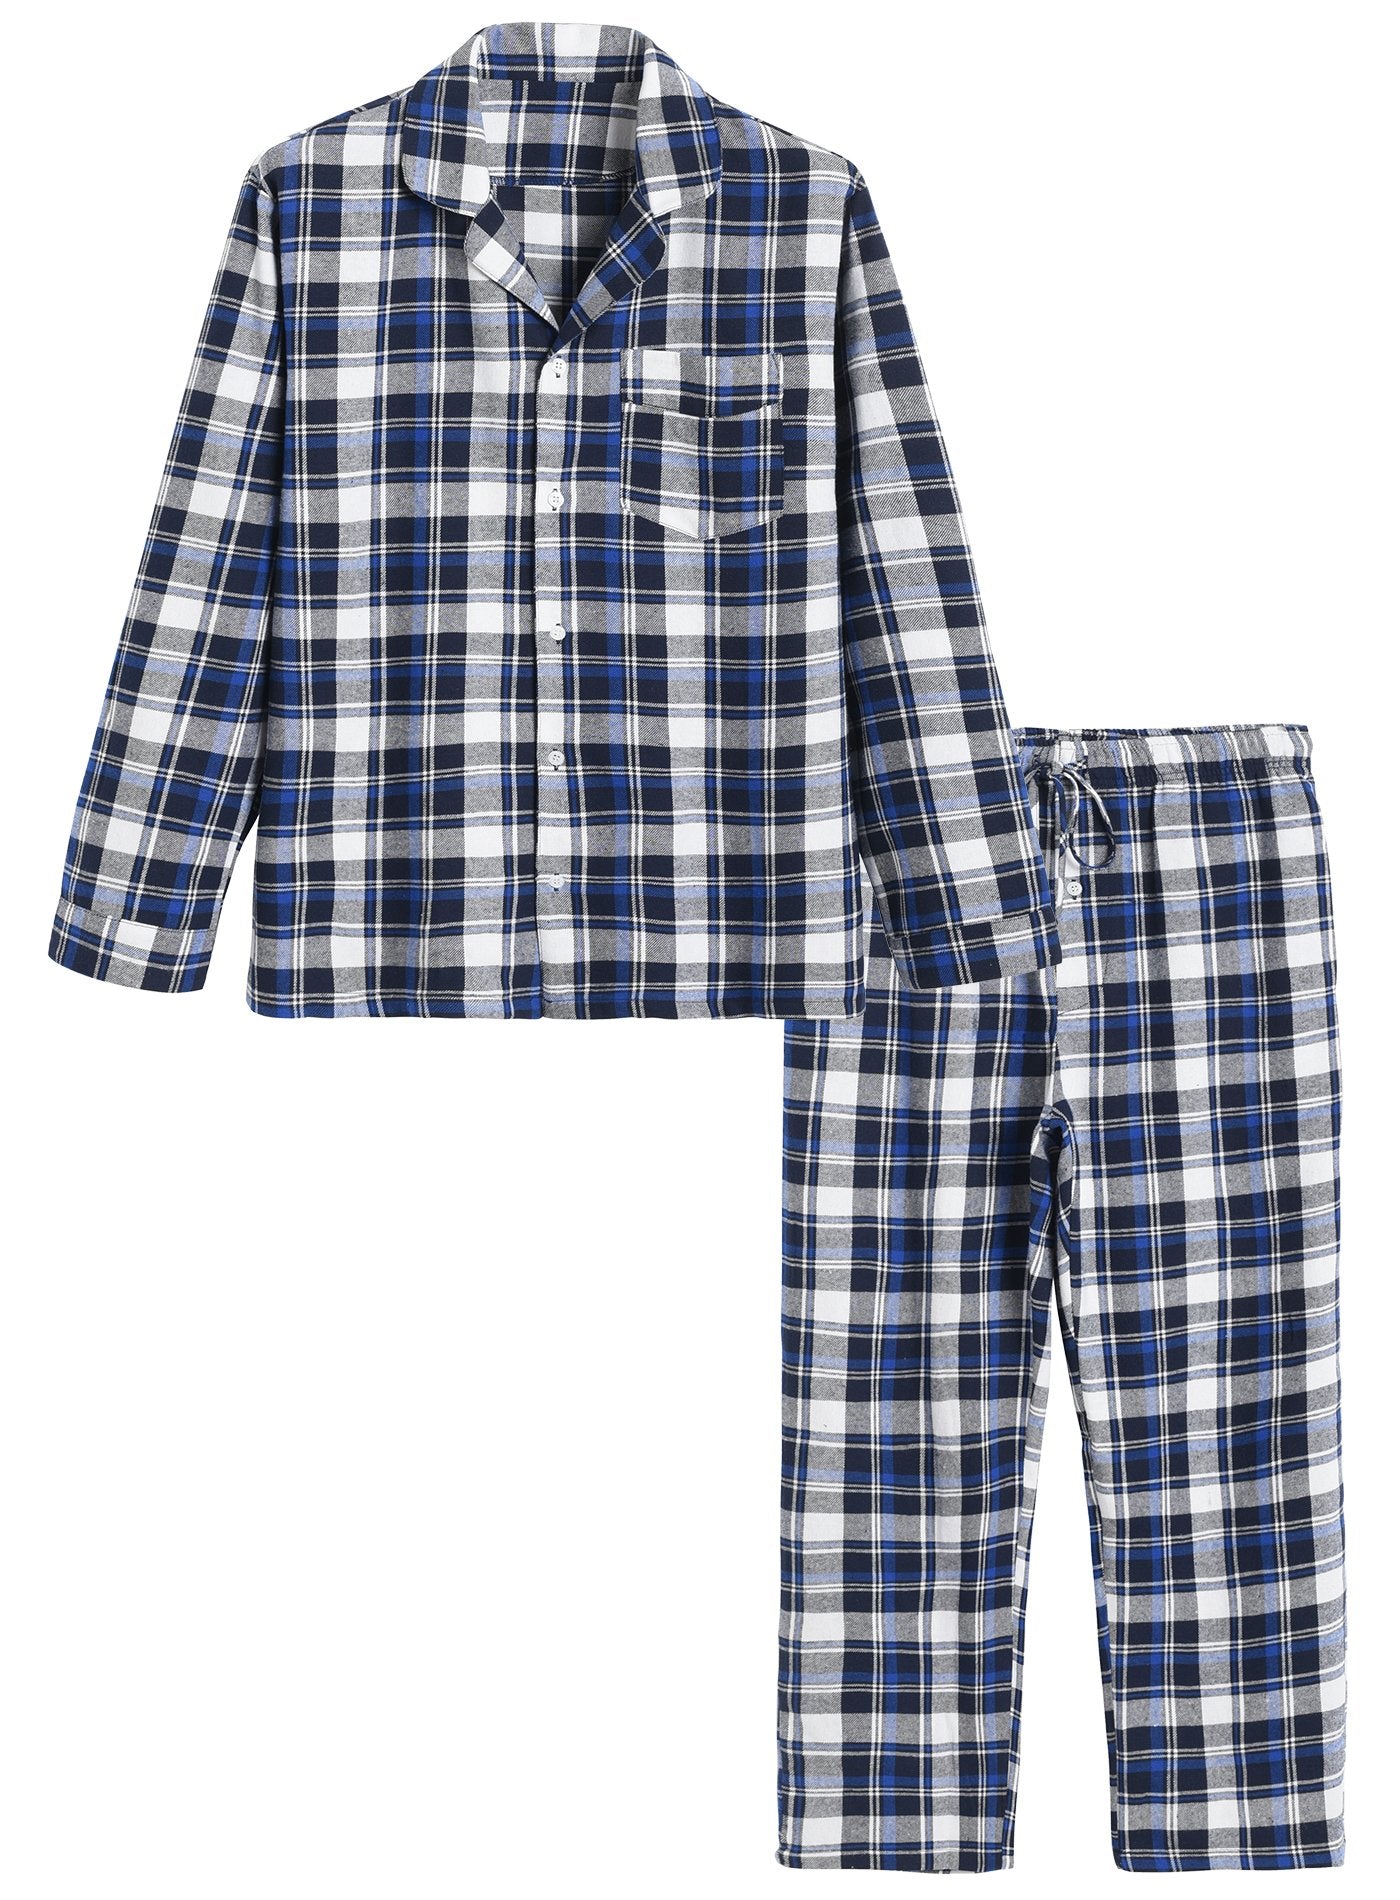 Plaid Couple Pajama Set Cotton Pair For Women And Men Comfortable Mens  Sleepwear And Nightwear BZEL T200111 From Xue01, $21.38